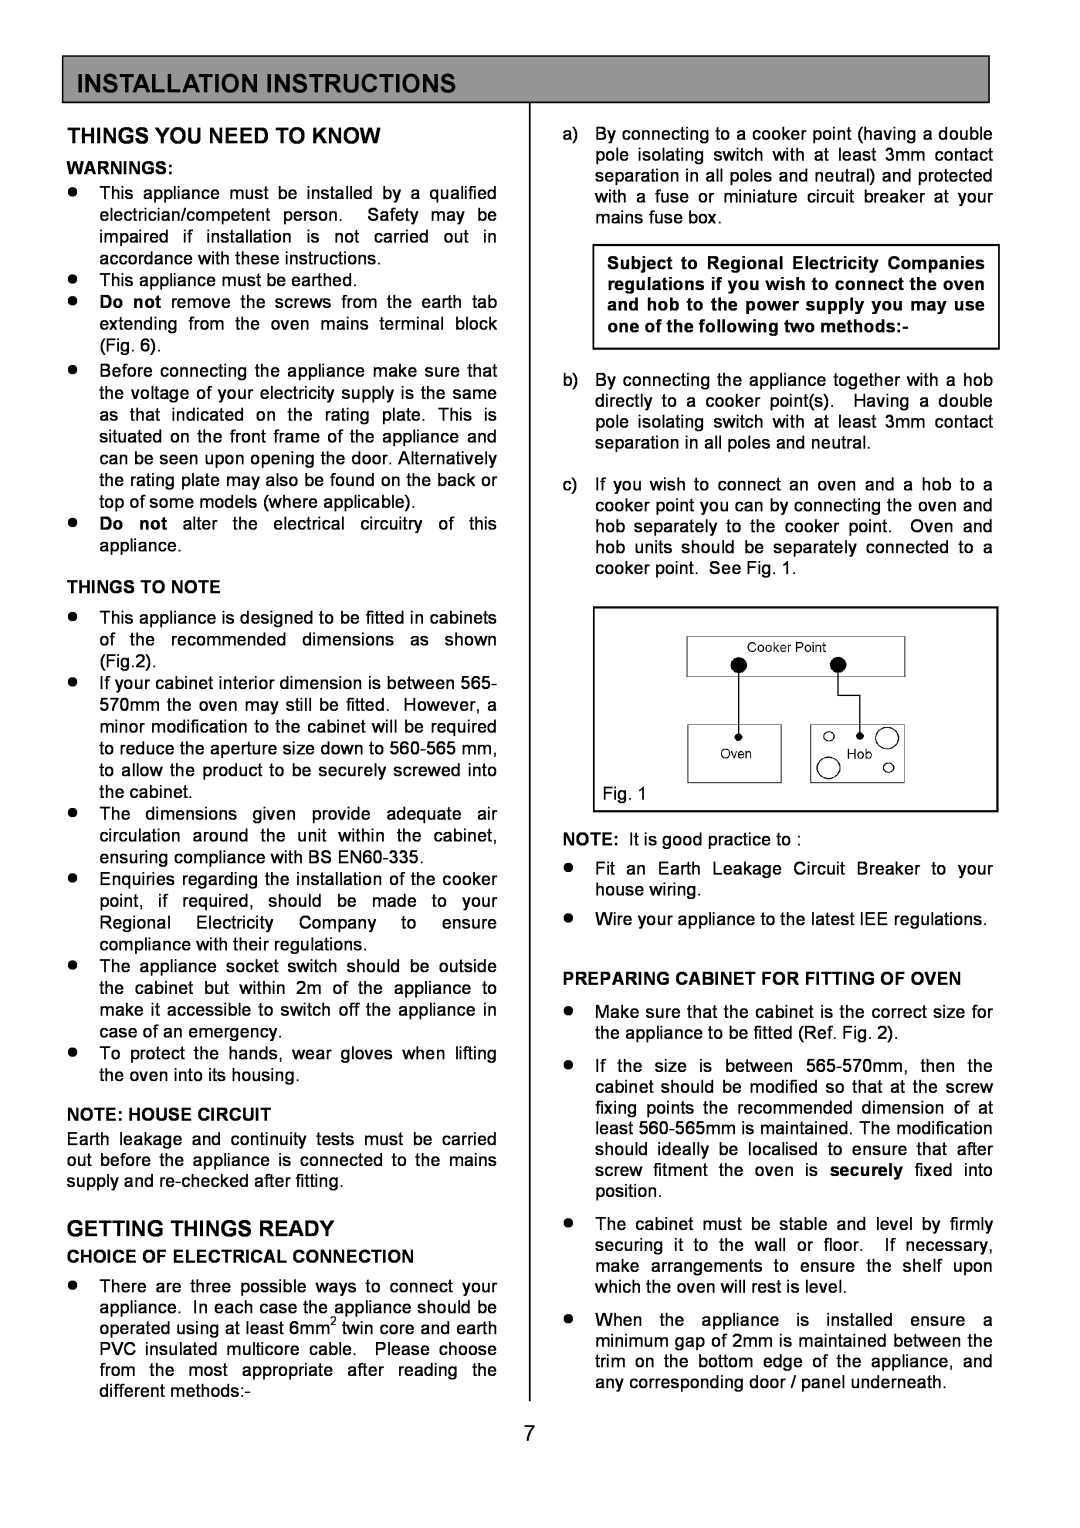 Electrolux EOD5310 Installation Instructions, Things You Need To Know, Getting Things Ready, Warnings, Things To Note 